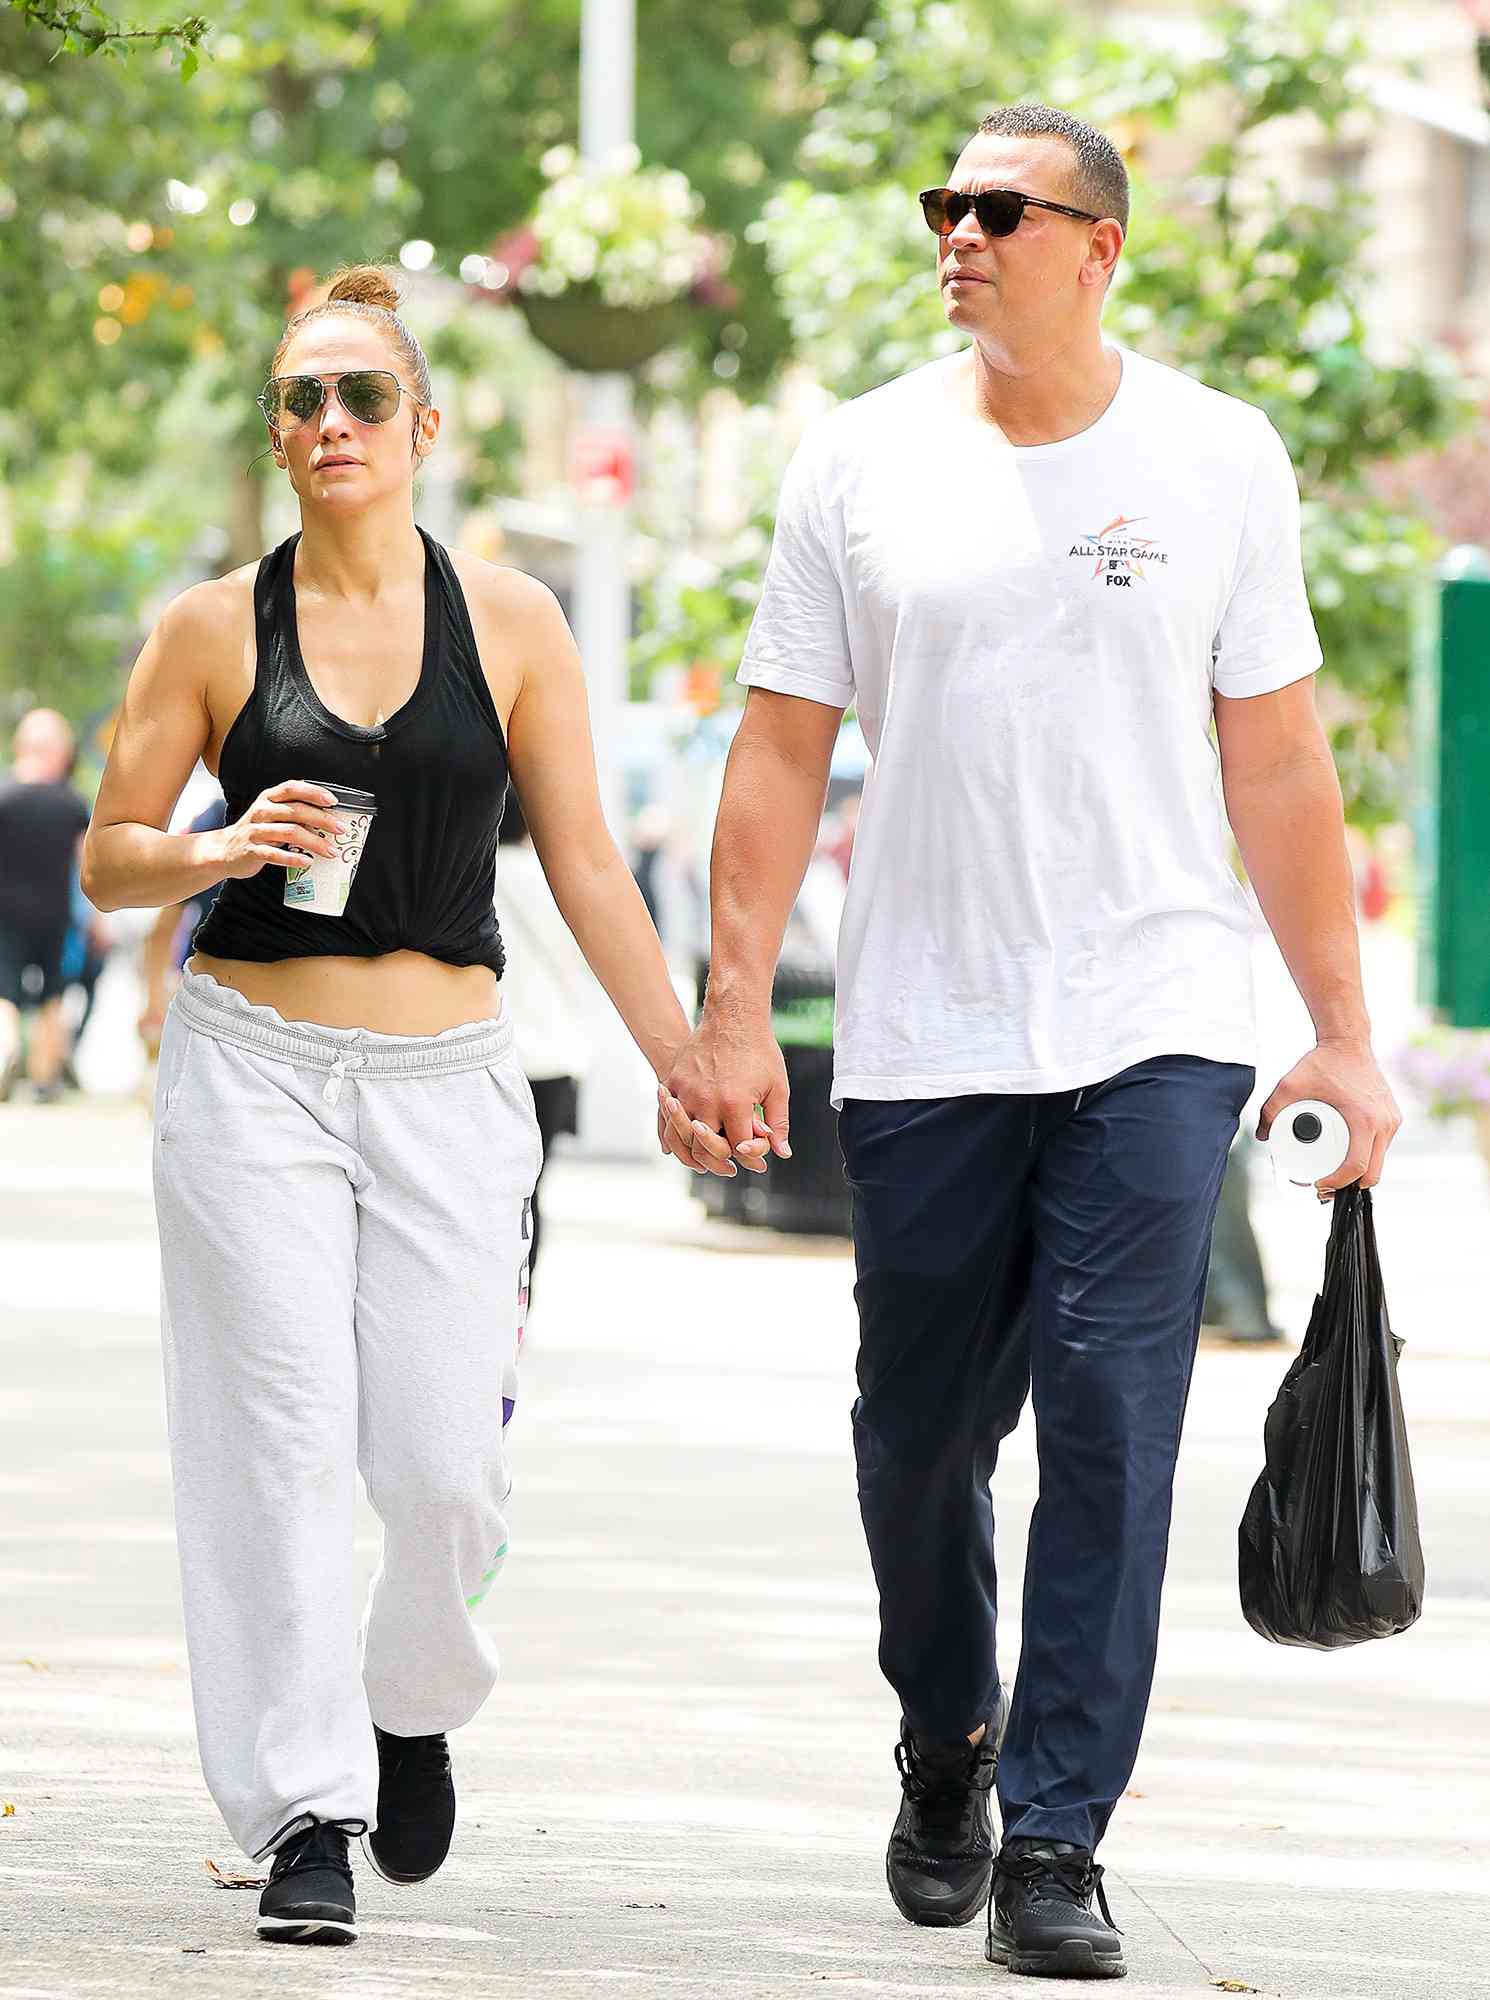 EXCLUSIVE: Jennifer Lopez and Alex Rodriguez are spotted all smiling after their hit the gym in New York City